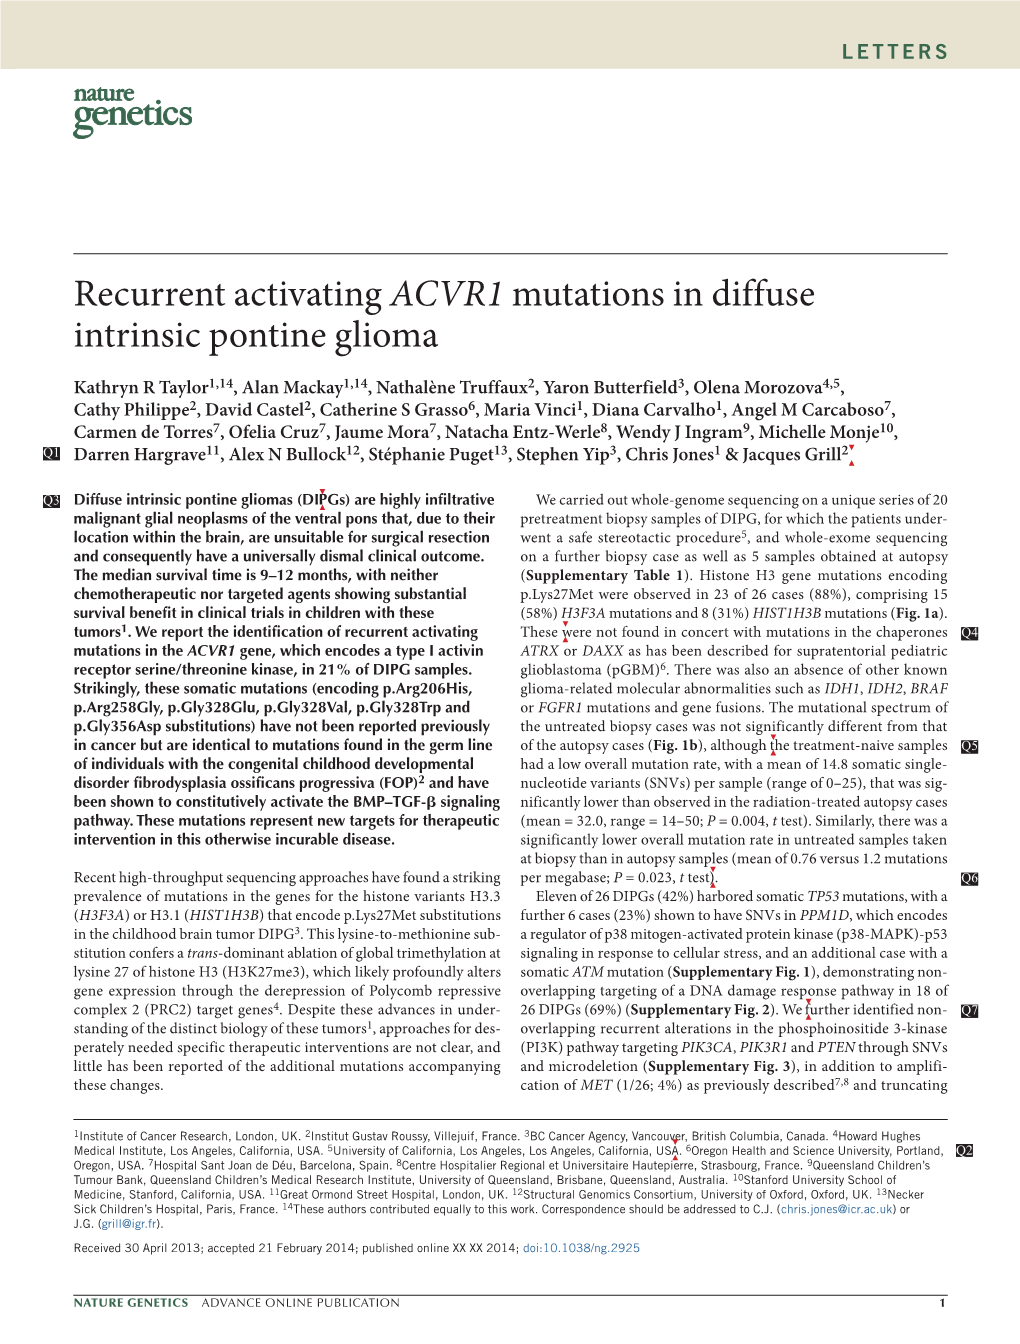 Recurrent Activating ACVR1 Mutations in Diffuse Intrinsic Pontine Glioma